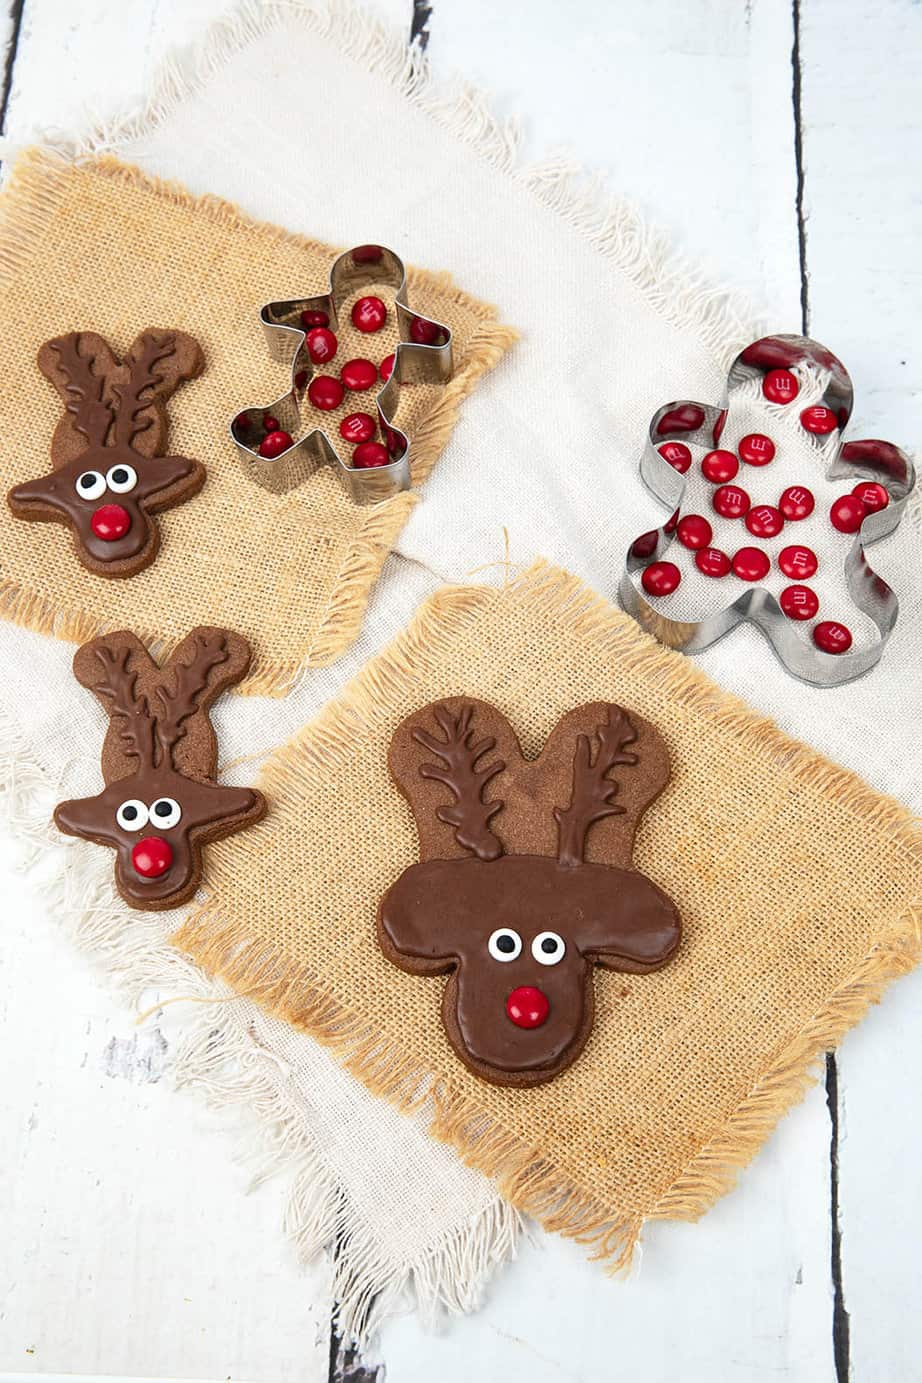 These super cute chocolate reindeer cookies are made using an upside-down gingerbread man cutter. Take a look at the chocolate sugar cookie recipe. The reindeer is decorated with an M&M for a Rudolph red nose. Just perfect for gifting or school lunches in the lead-up to Christmas.